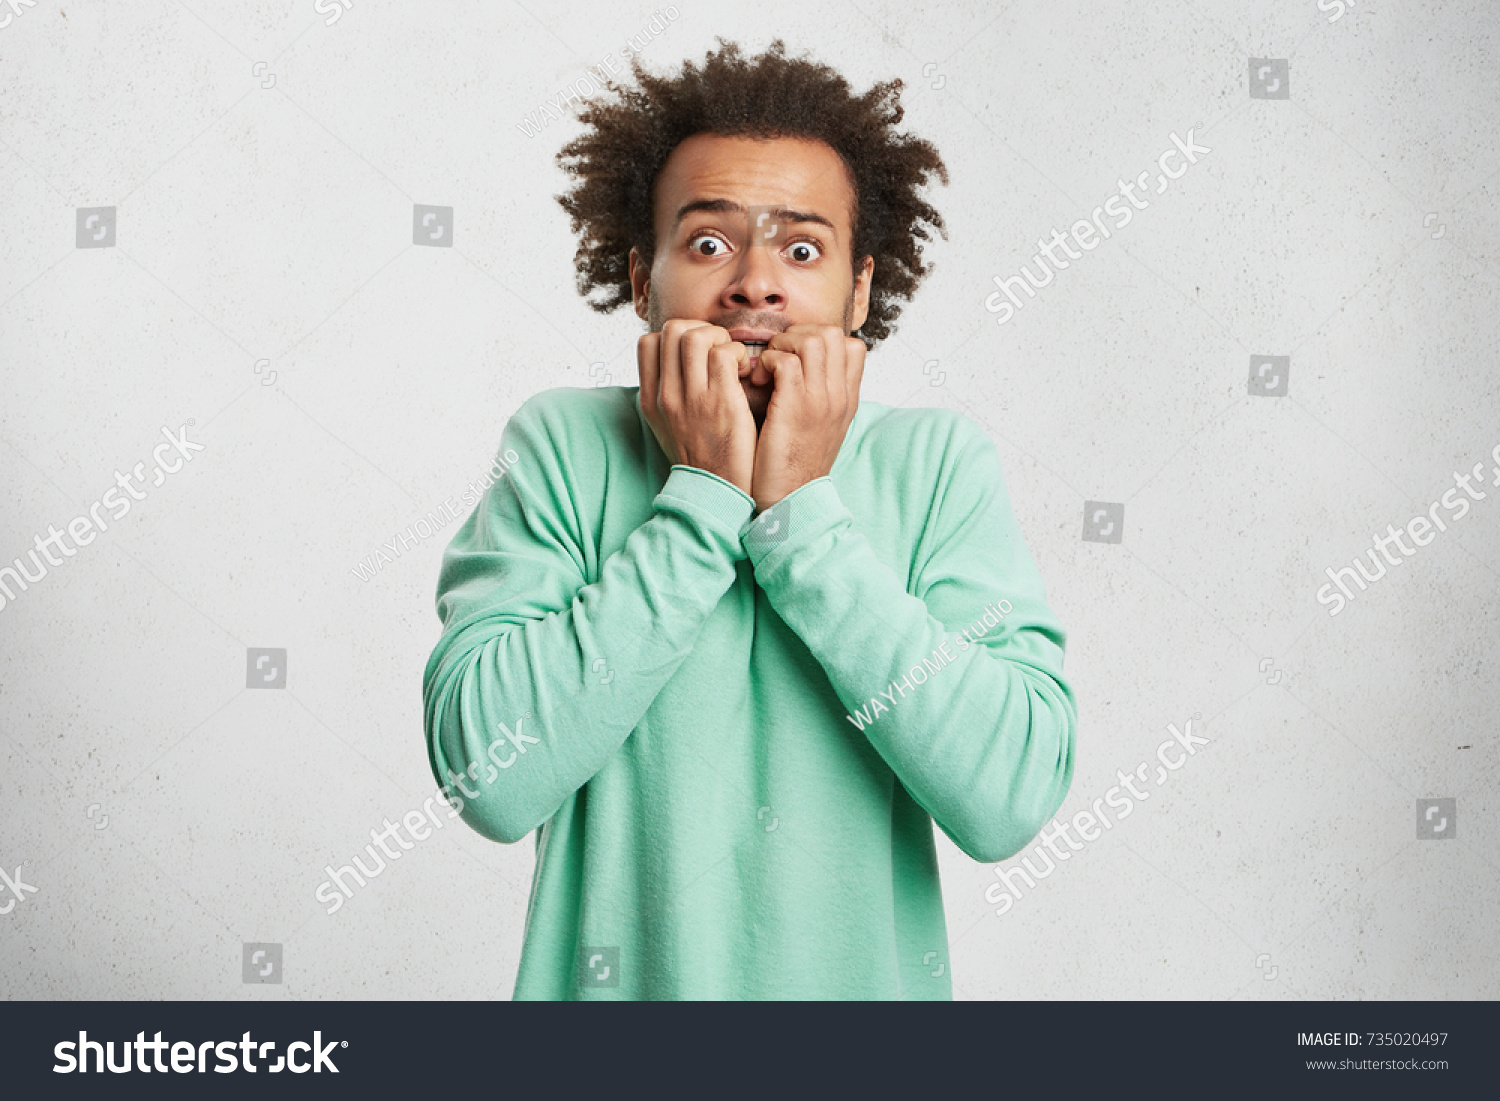 Portrait of young Afro American man with scared and anxious expression, bites finger nails, wears green sweater, being afraid of visiting doctor. Human facial expressions and negative emotions concept #735020497